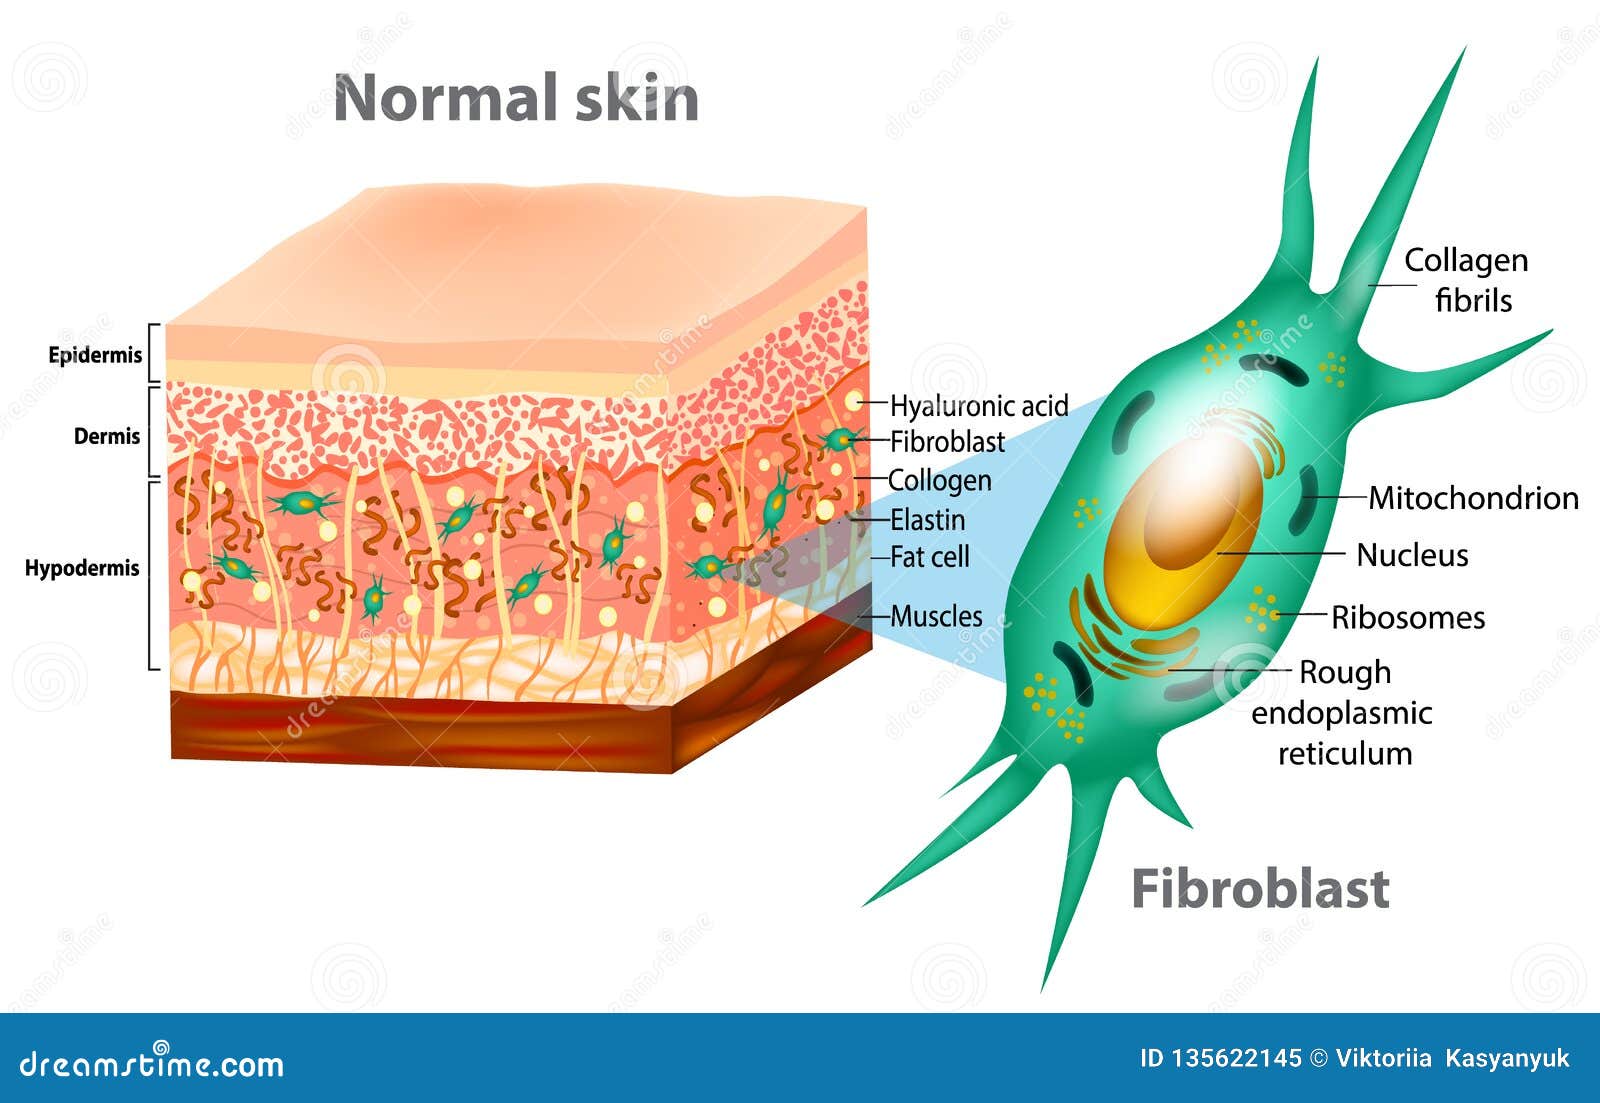 fibroblast and human skin structure